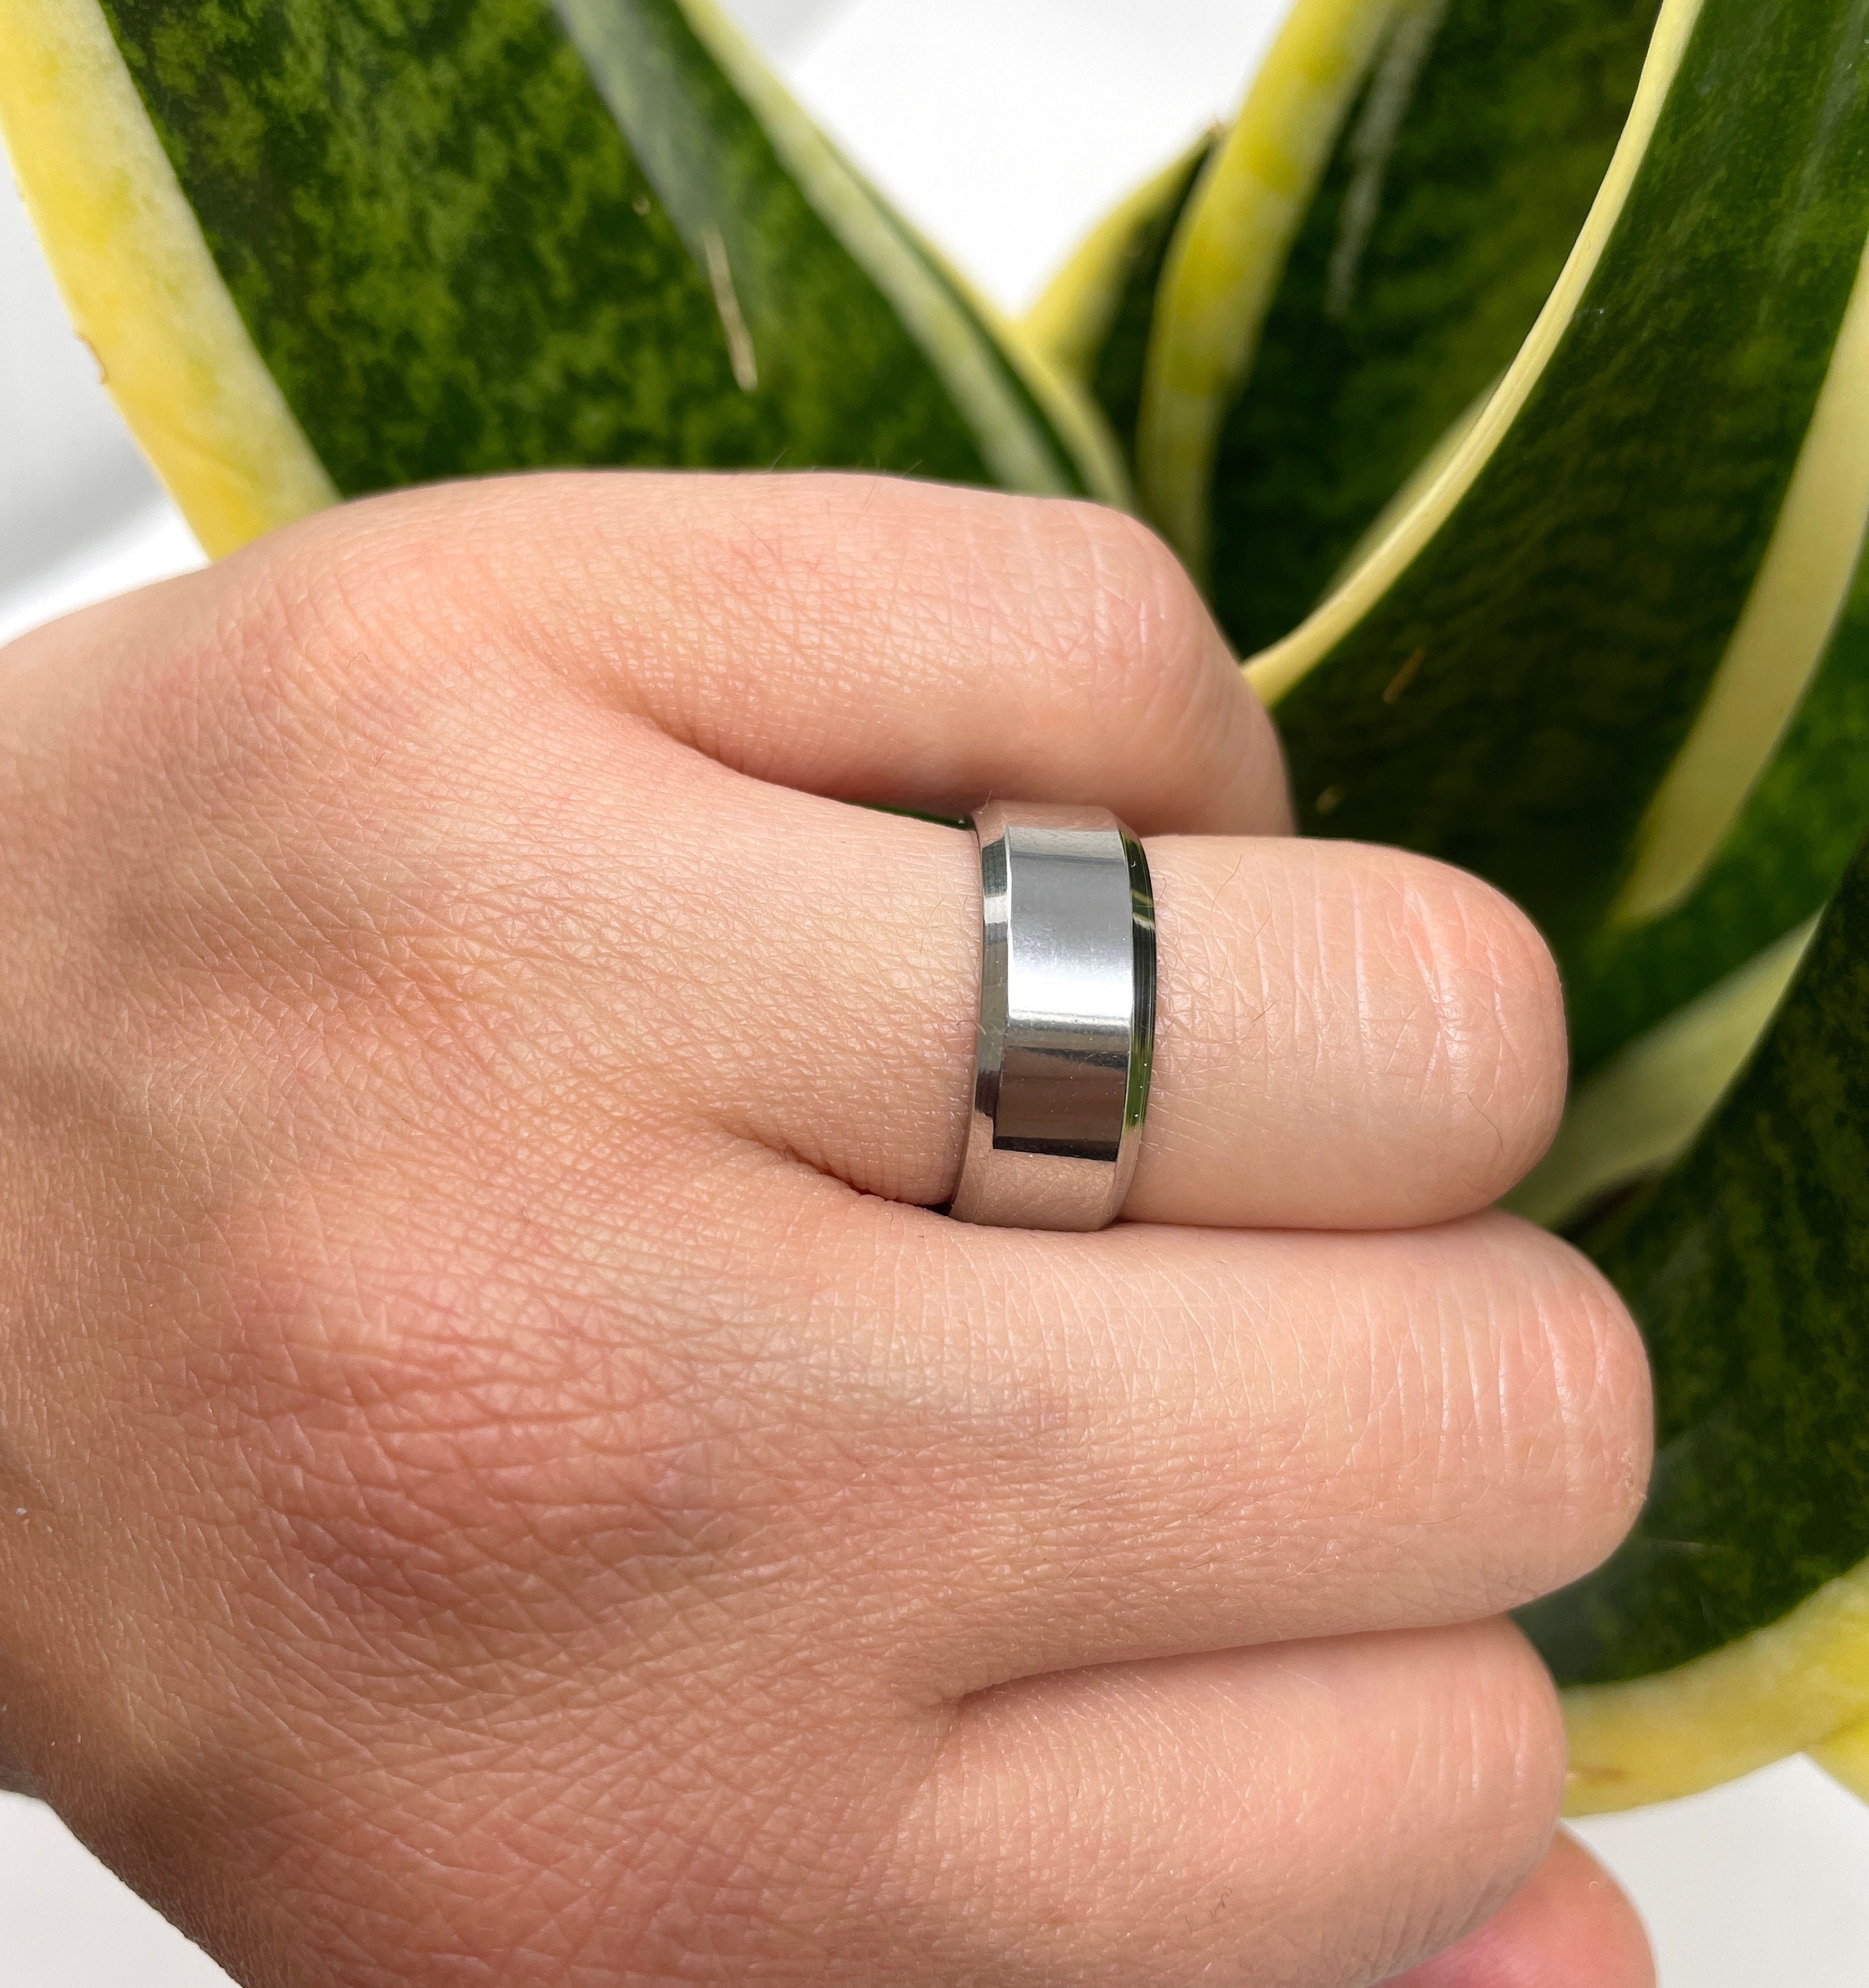 8mm Beveled 904L Stainless Steel Ring | Handcrafted in The USA